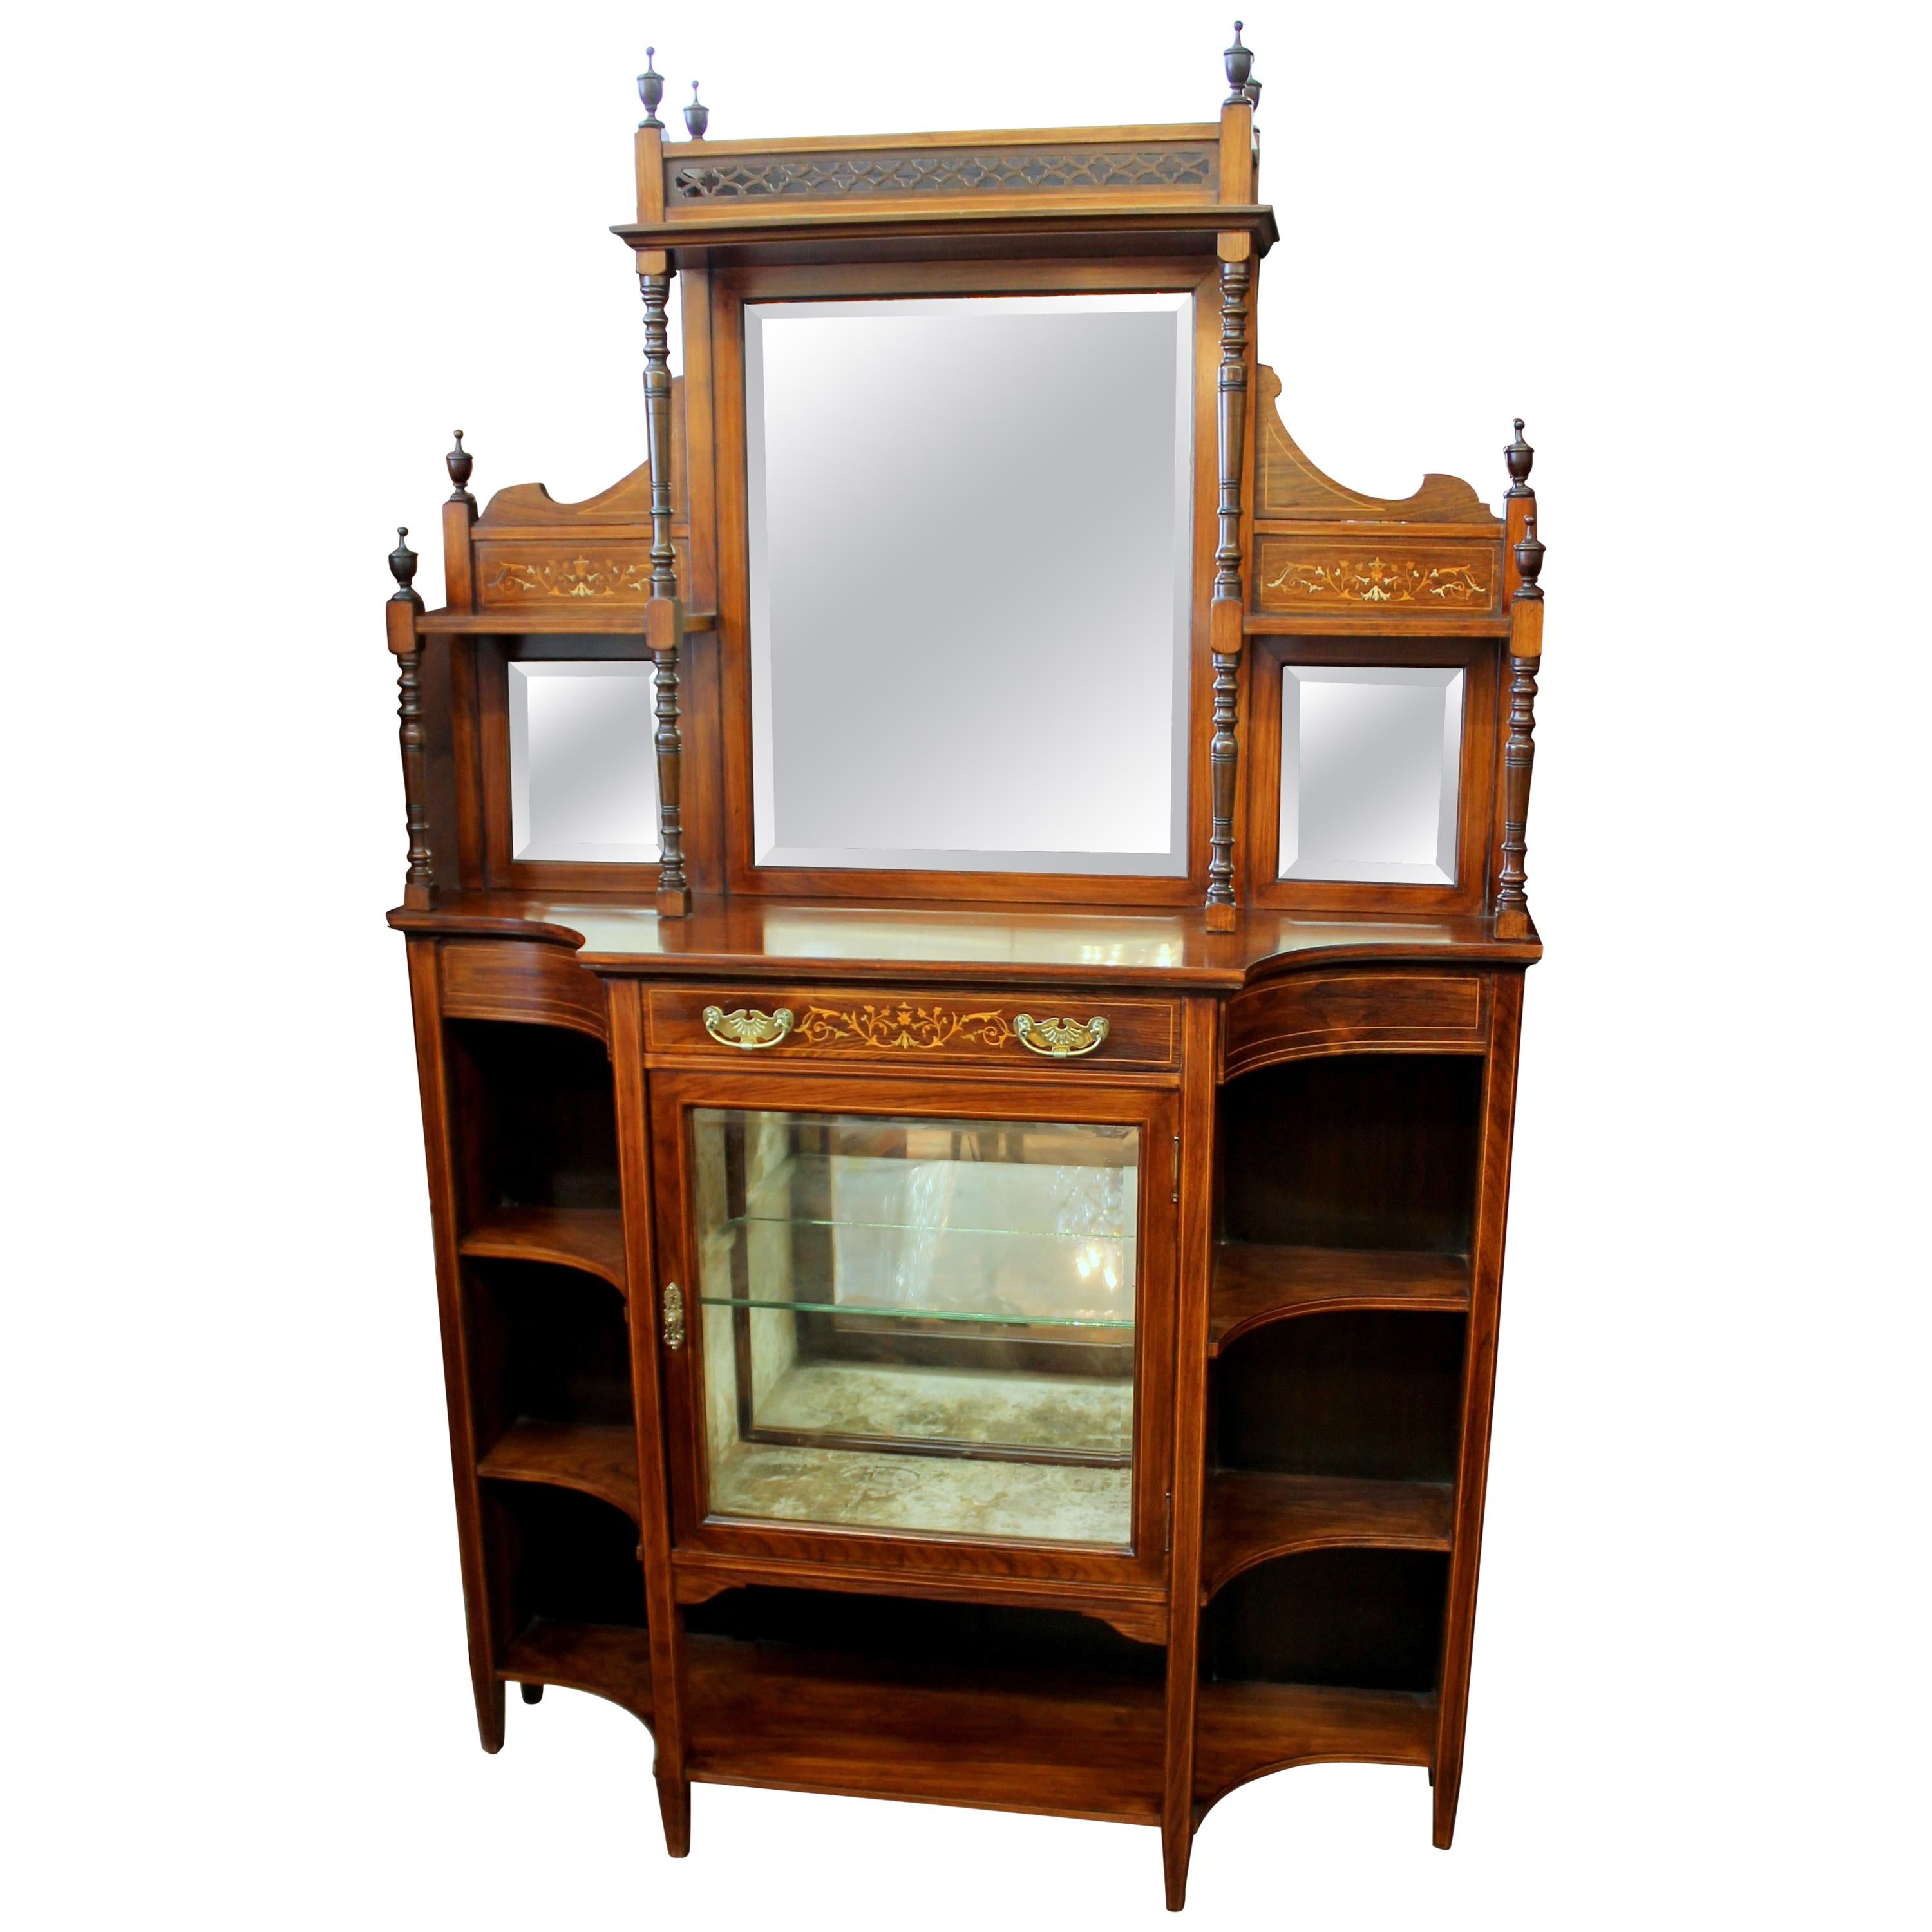 19th Century English Marquetry Inlaid Chiffonier/ Display Cabinet with Niches